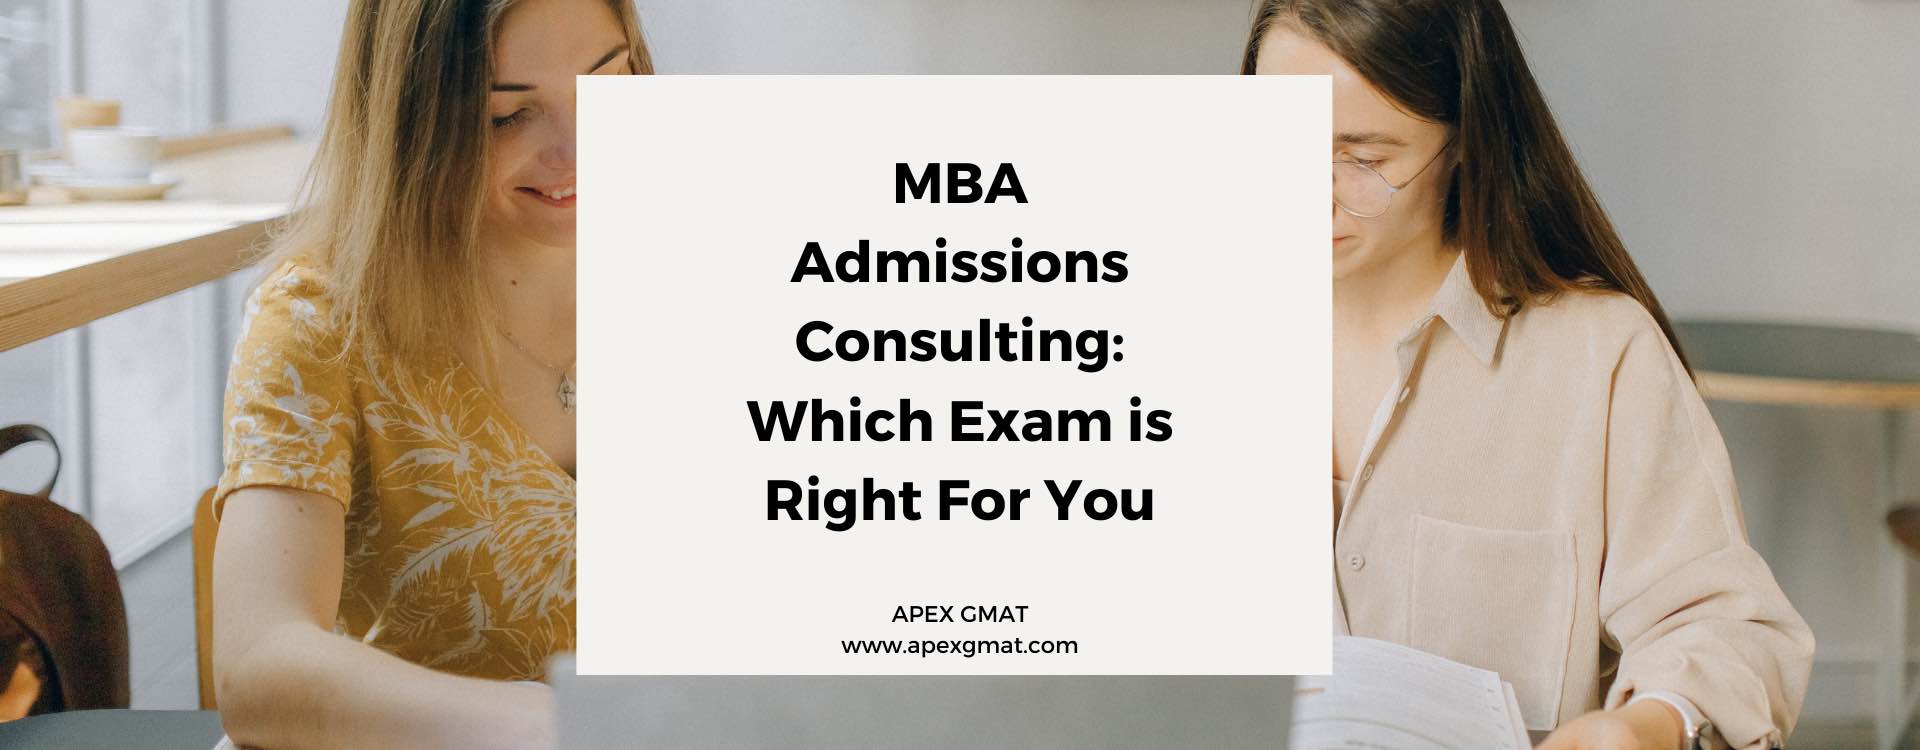 MBA Admissions Consulting: Which Exam is Right For You